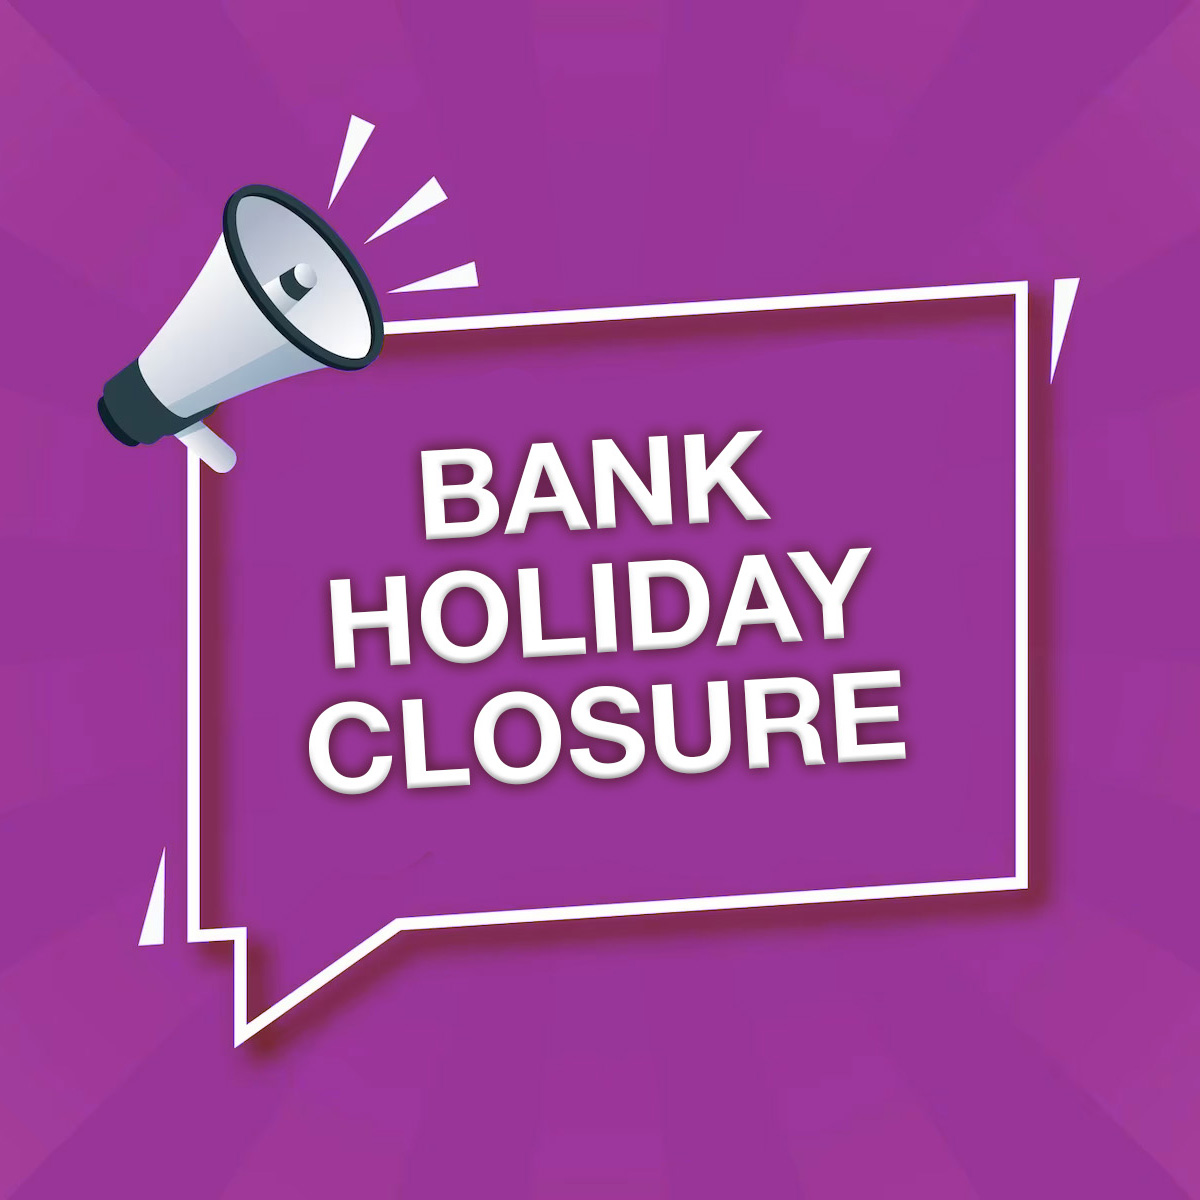 📢 CUSTOMER NOTICE - Bank Holiday Closure 📢 Libraries across Northern Ireland will be closed on Monday 27 May. Our online services will still be available.